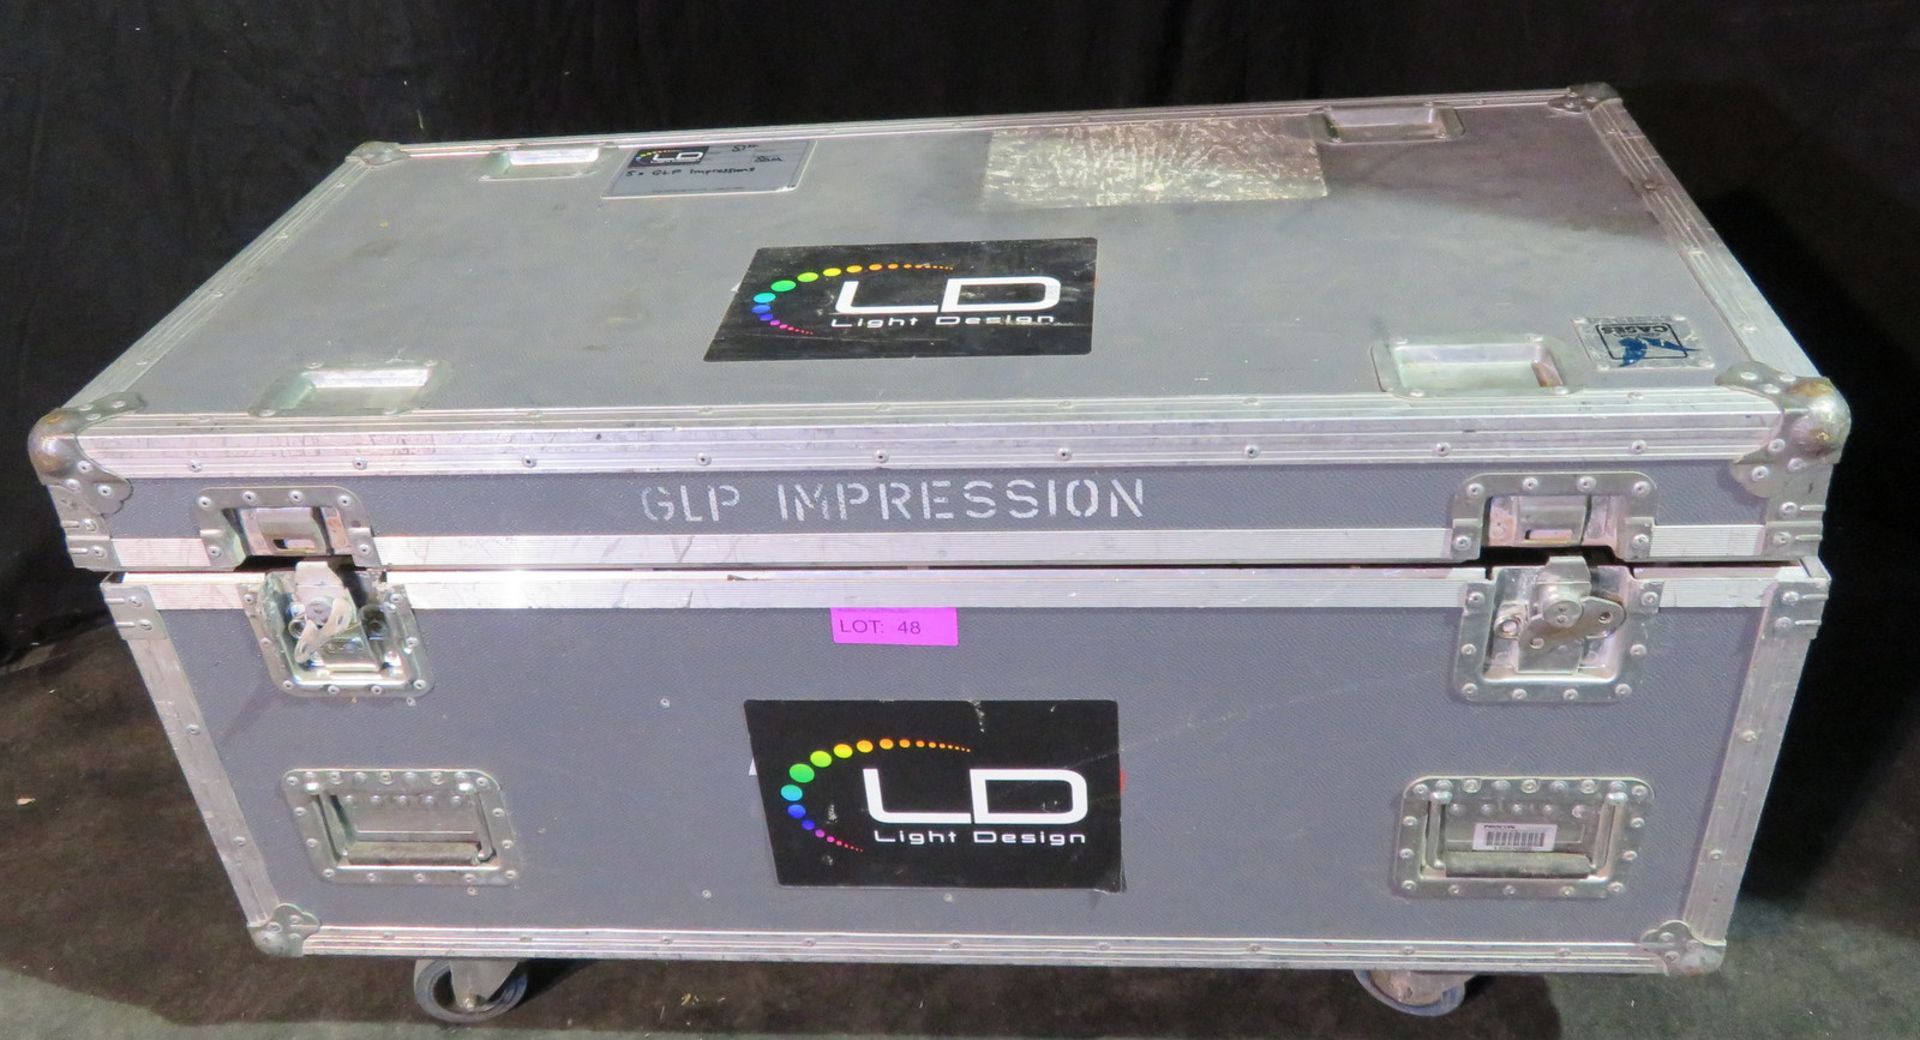 GLP impression 120ZR for spares or repairs in six way flightcase - Image 10 of 10